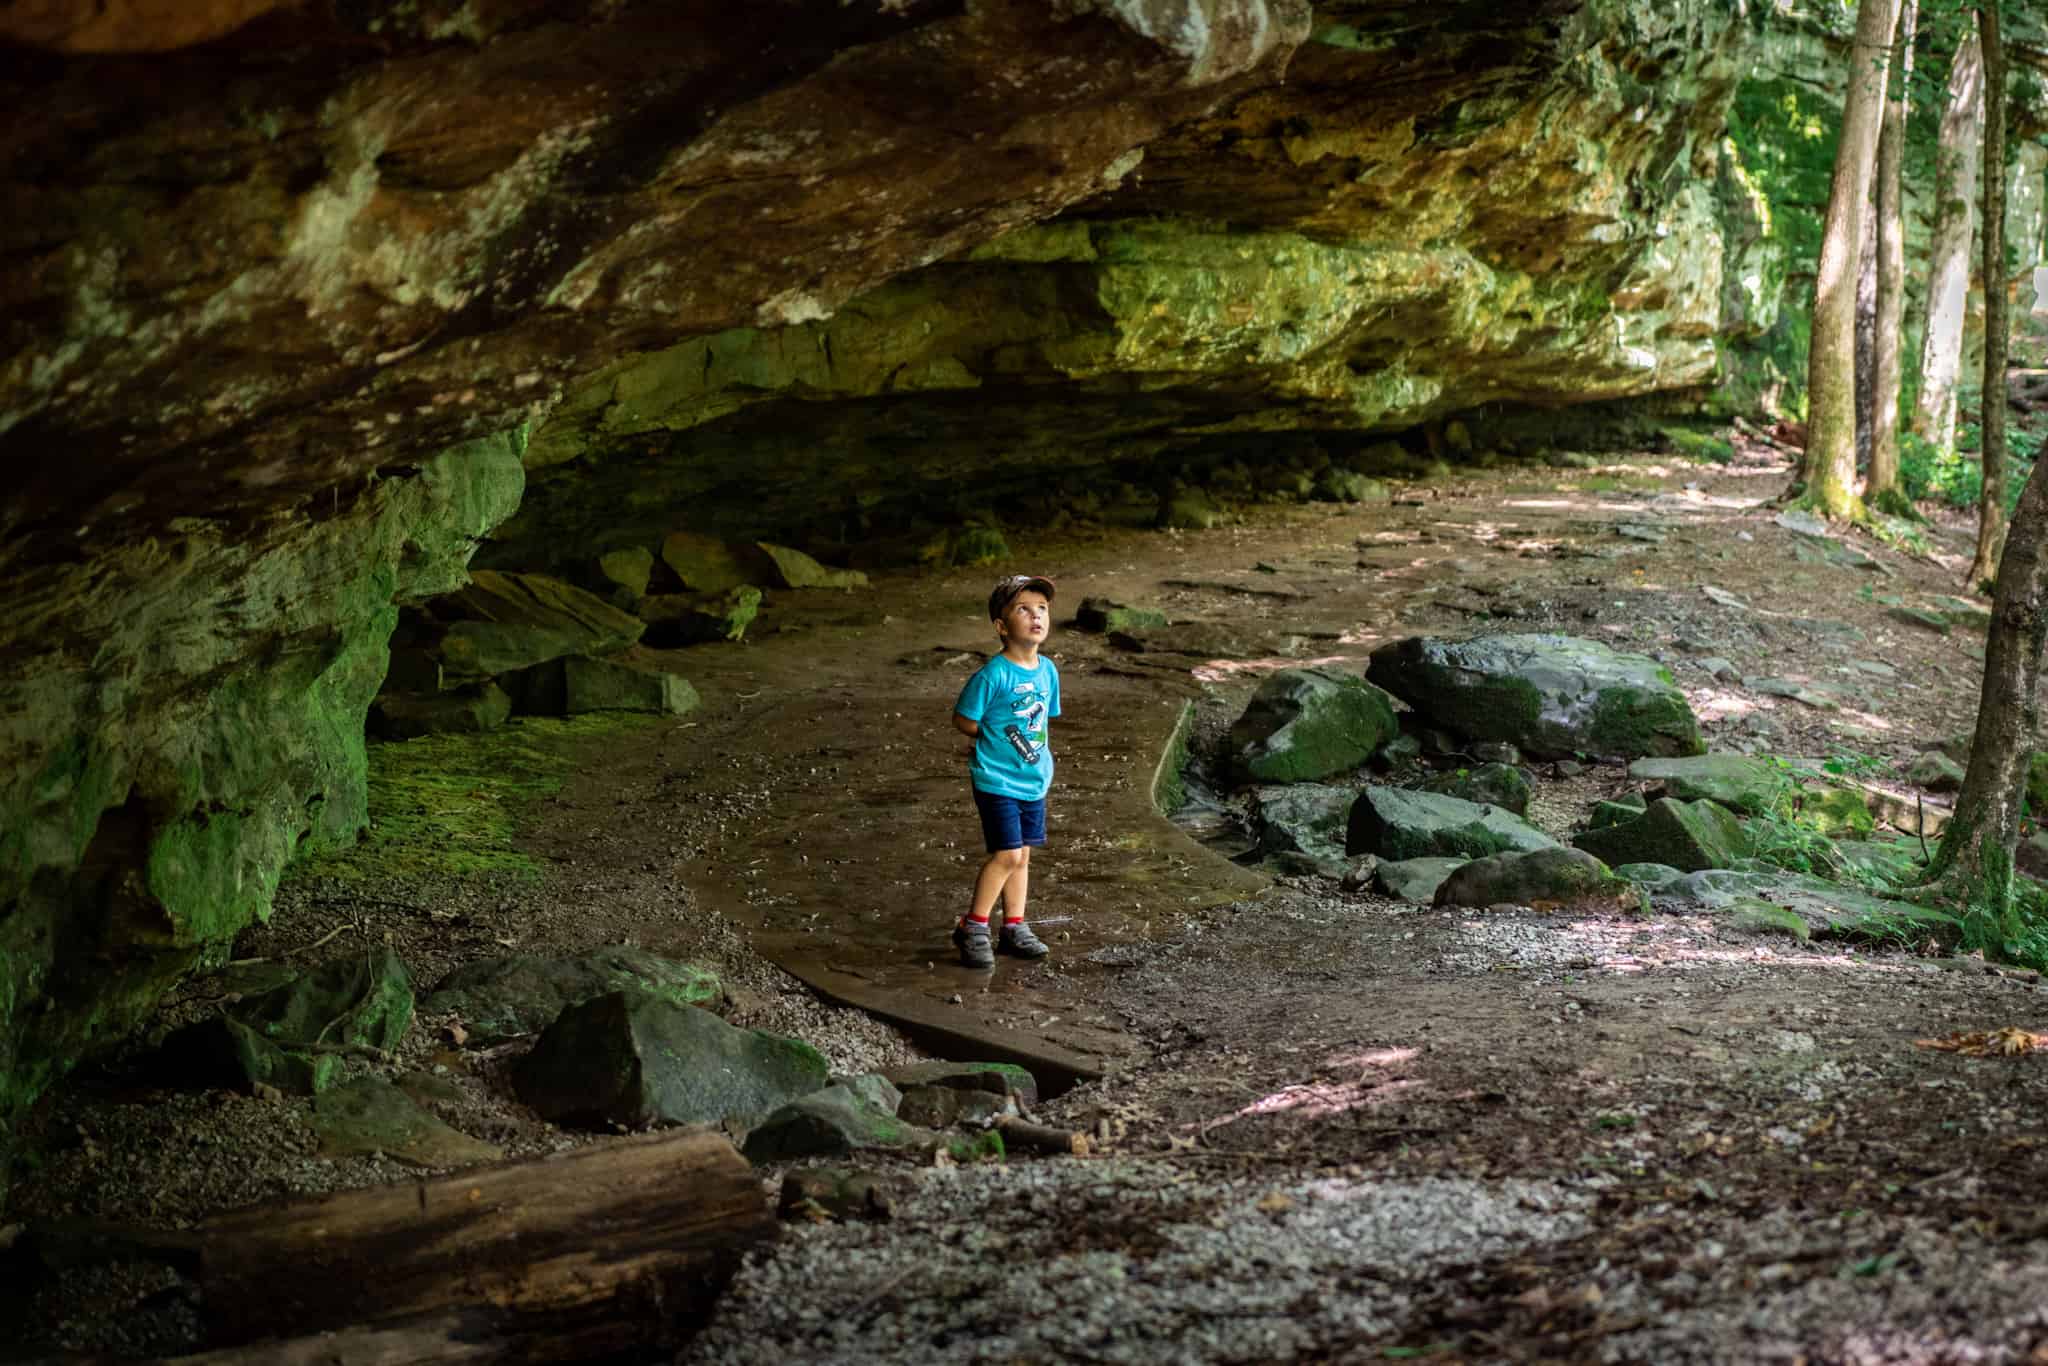 Giant City Nature Trail - Family friendly places to explore in Illinois